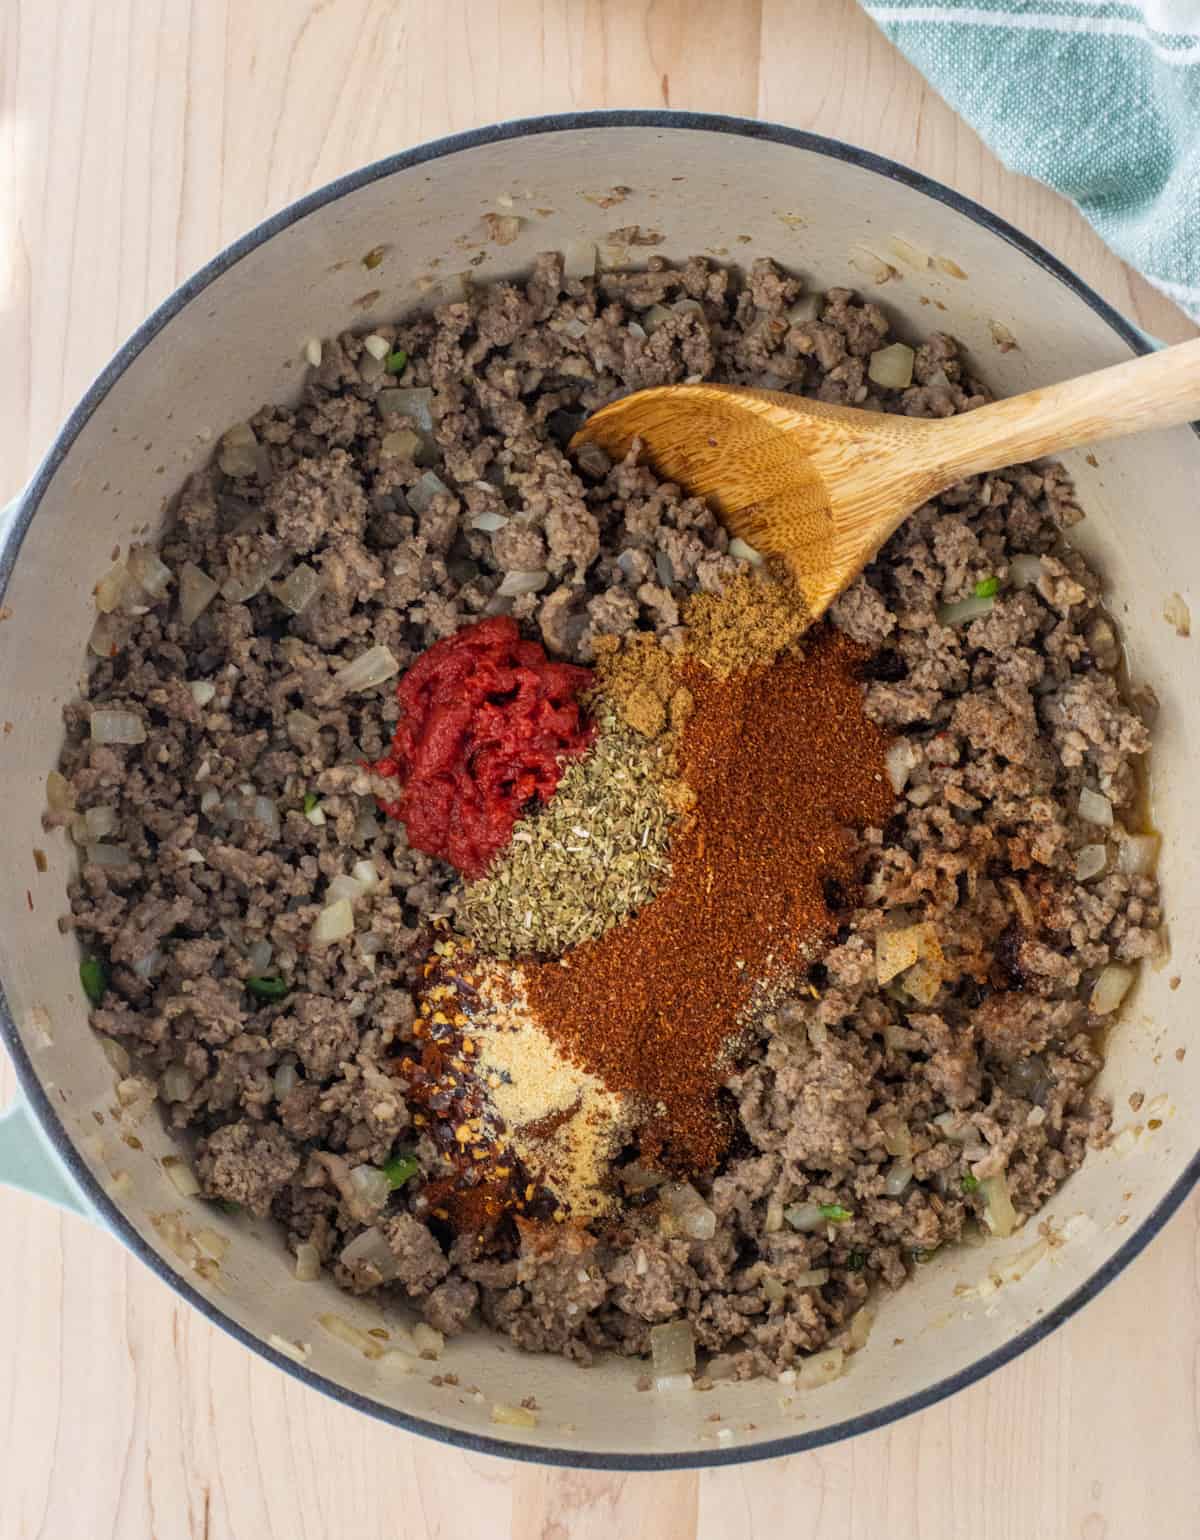 Tomato paste and spices on top of cooked ground meat.